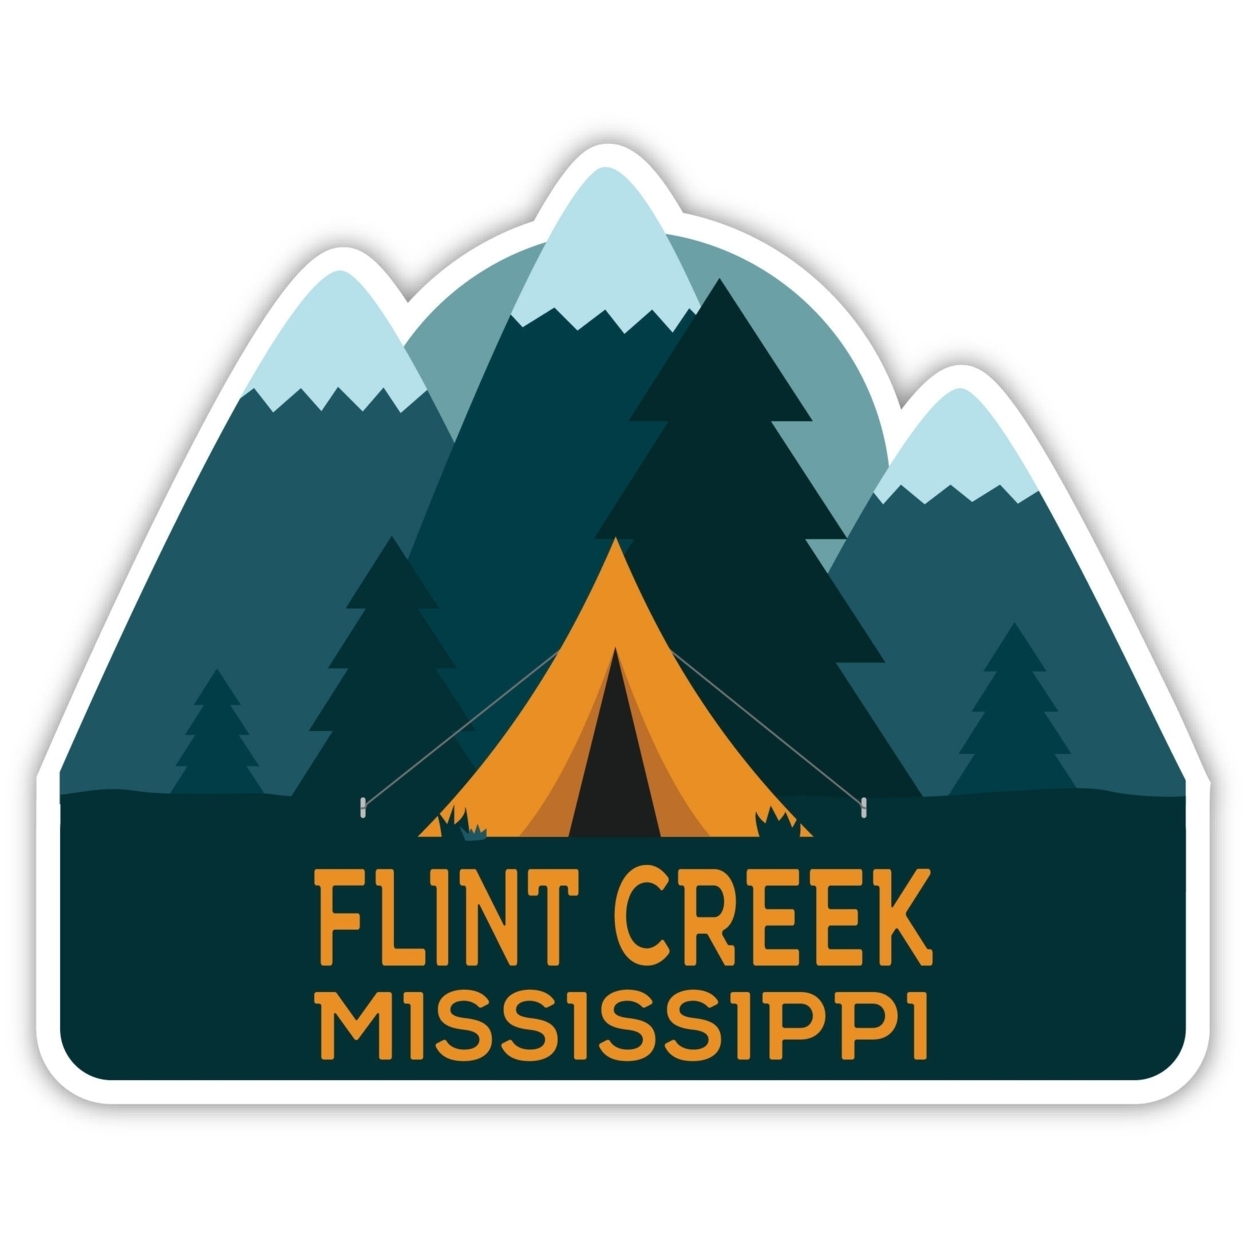 Flint Creek Mississippi Souvenir Decorative Stickers (Choose Theme And Size) - 4-Pack, 10-Inch, Tent